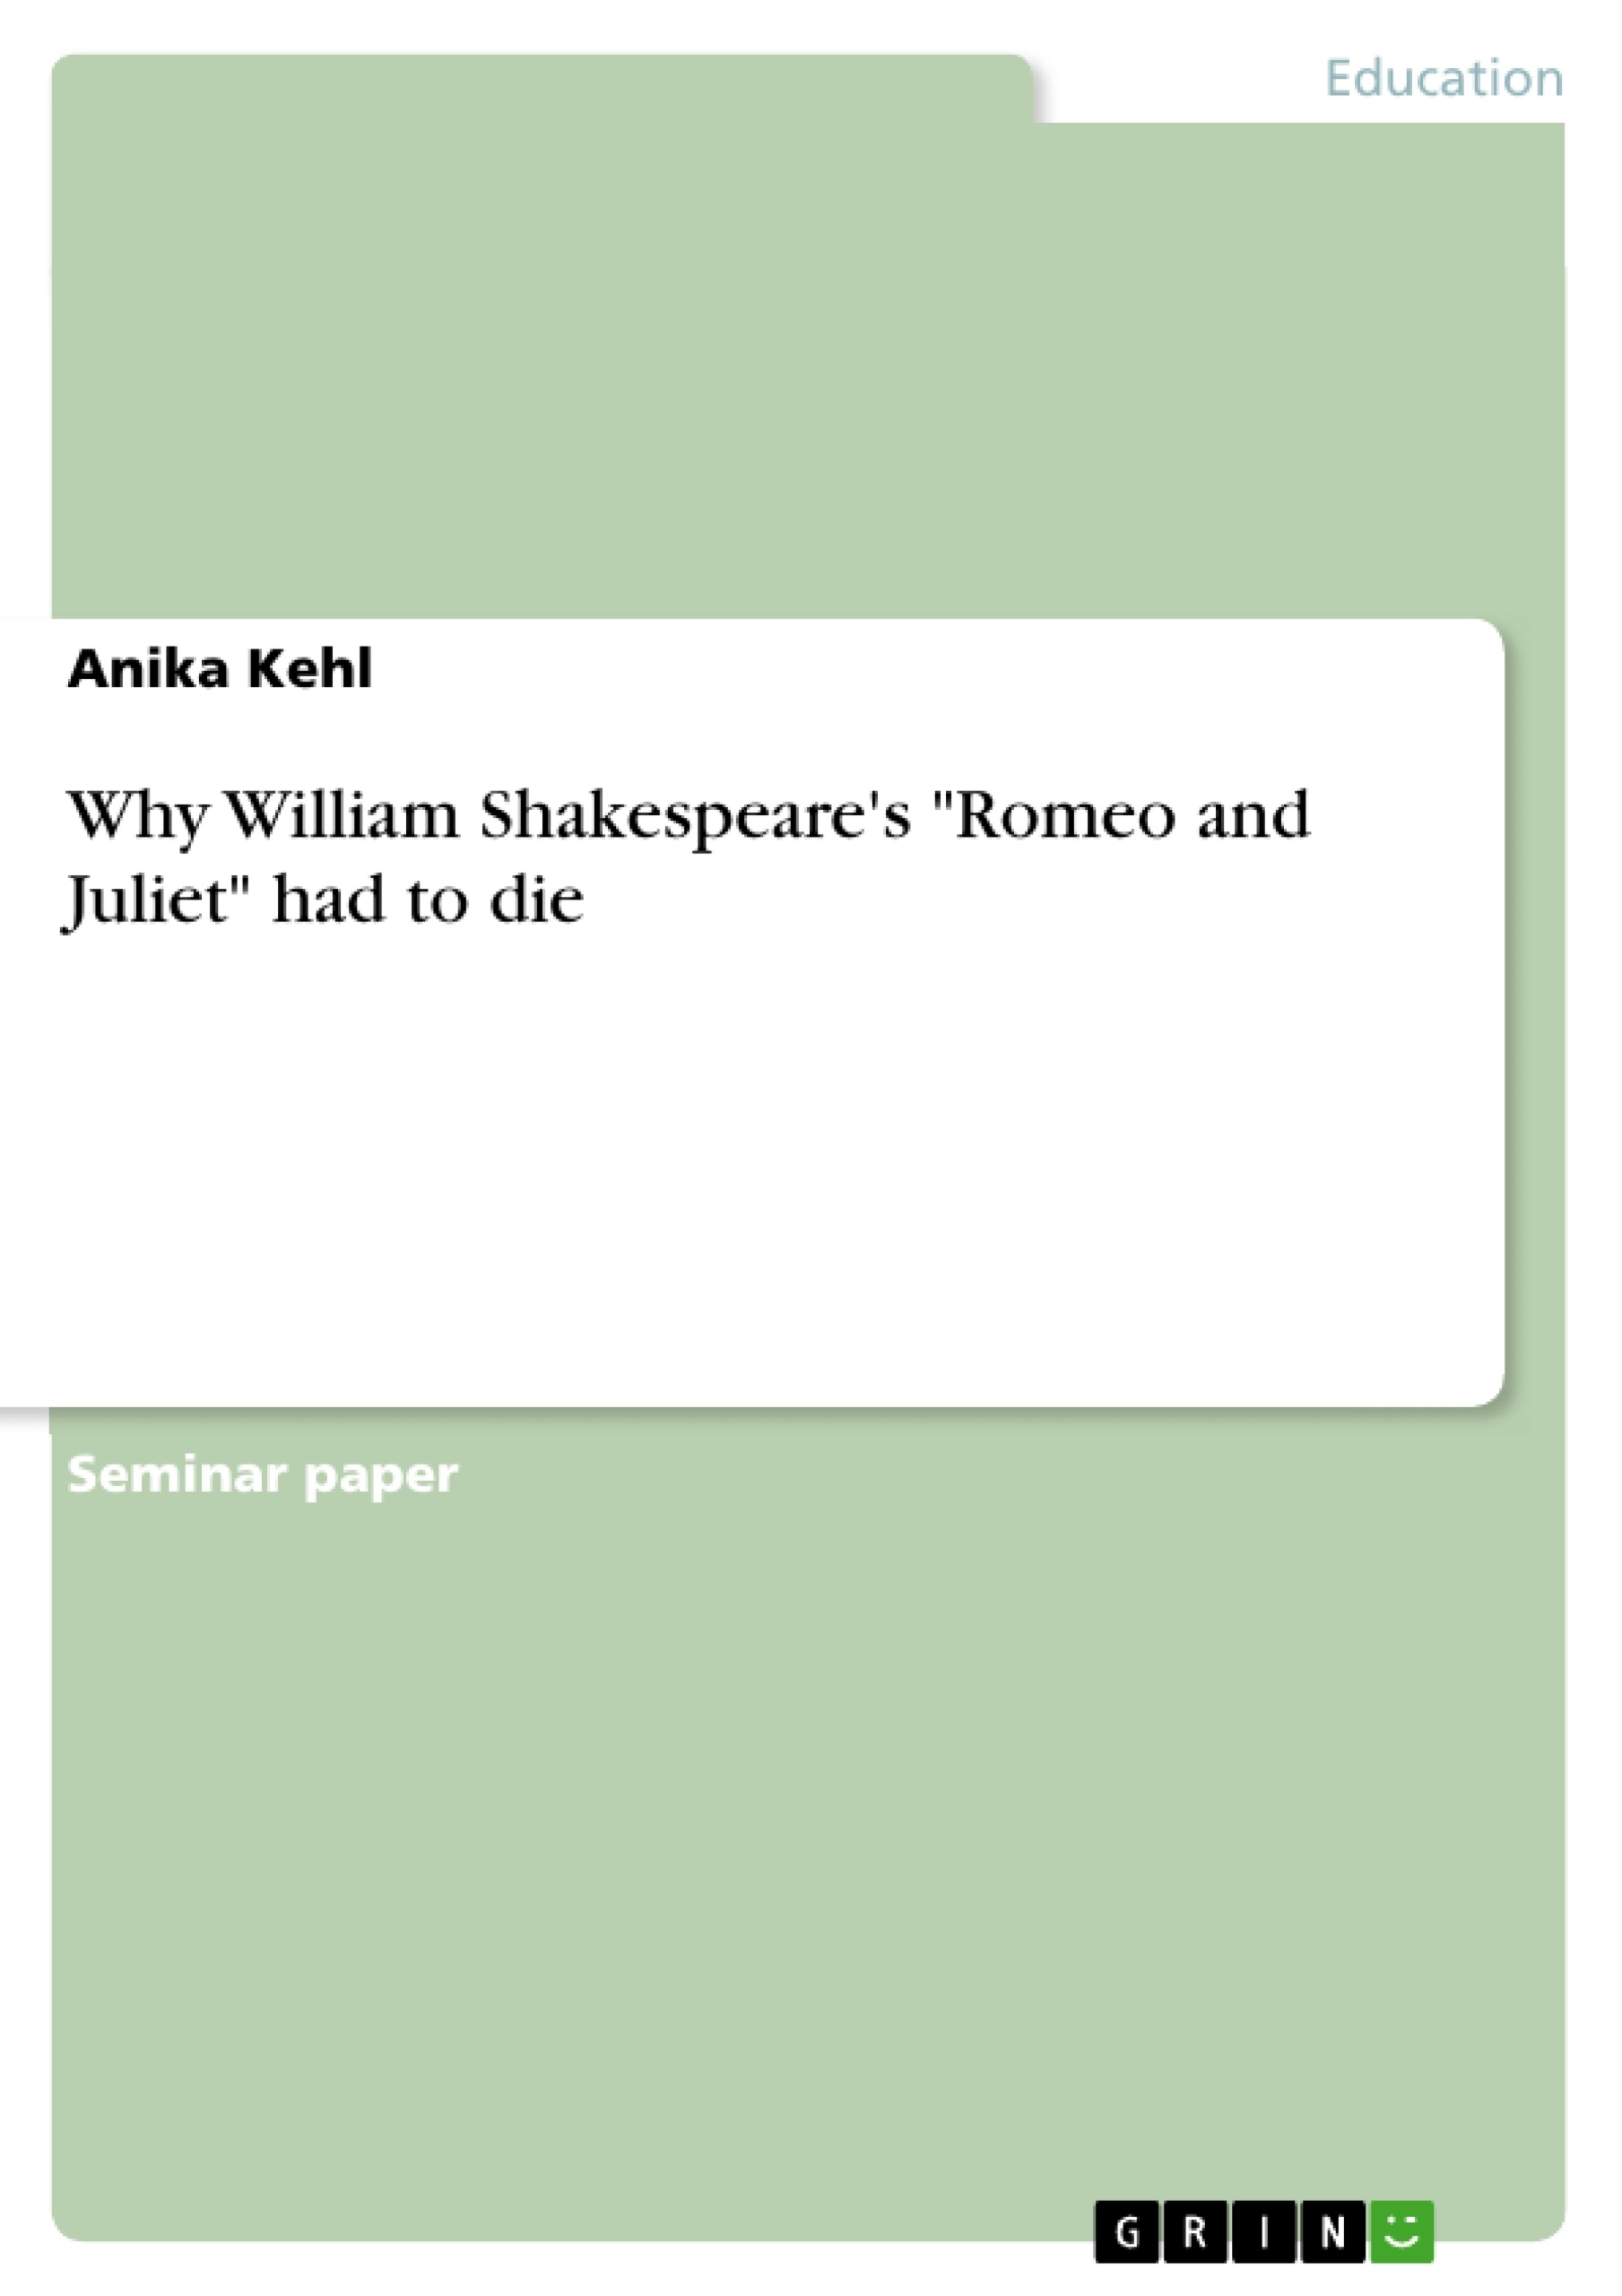 Title: Why William Shakespeare's "Romeo and Juliet" had to die